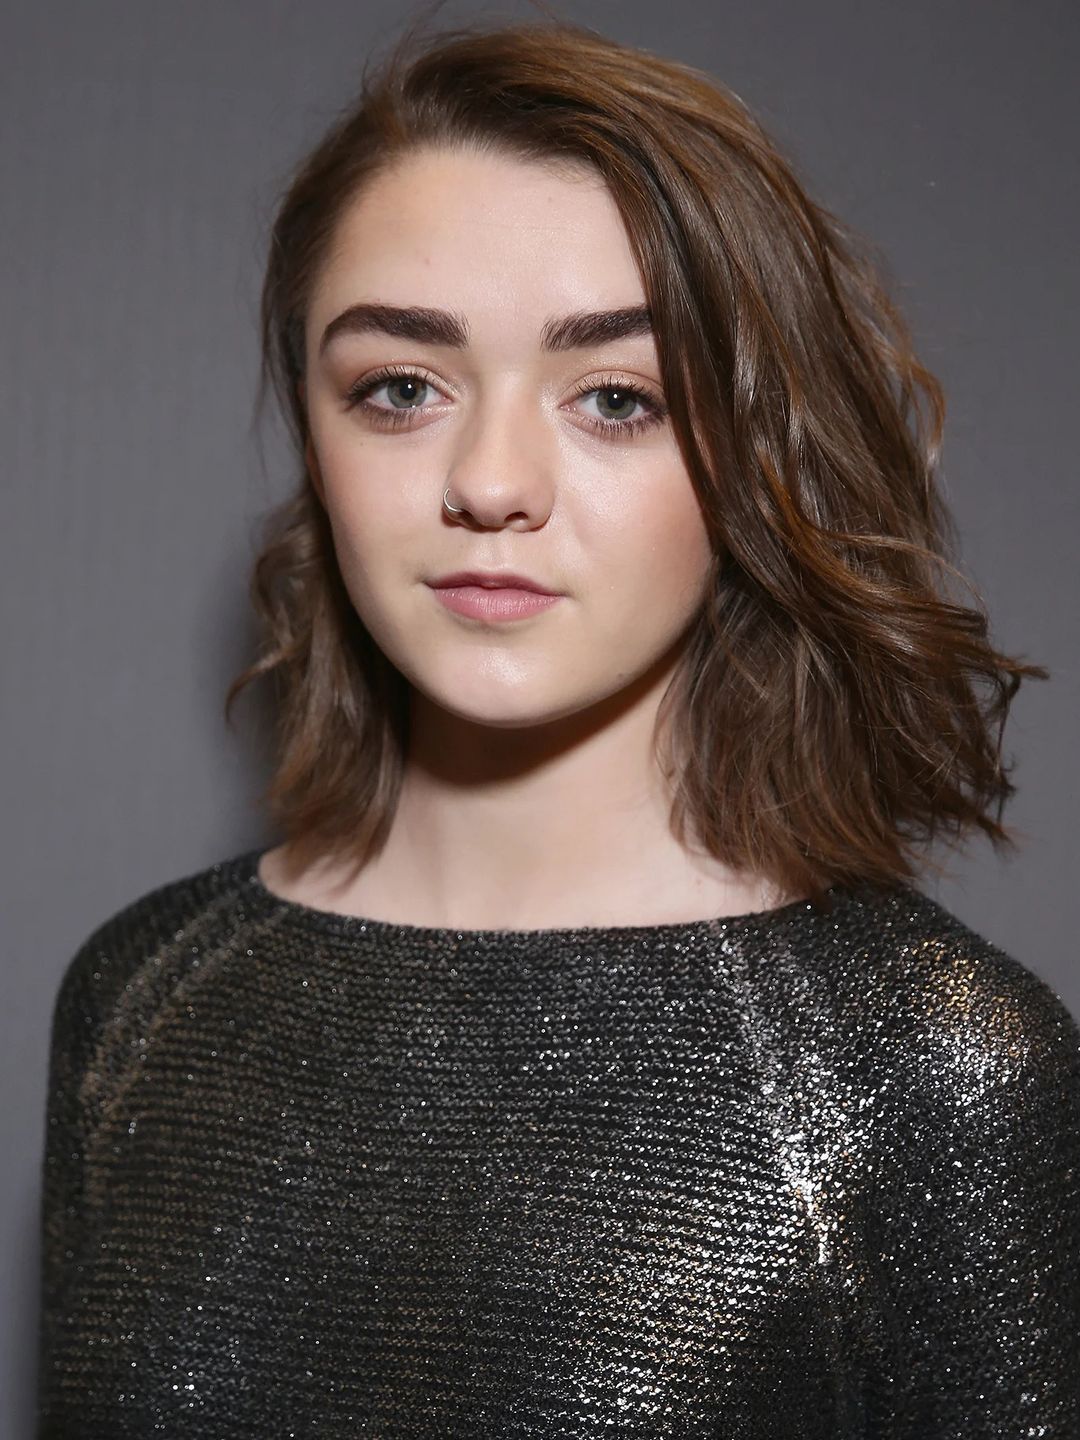 Maisie Williams where did she study